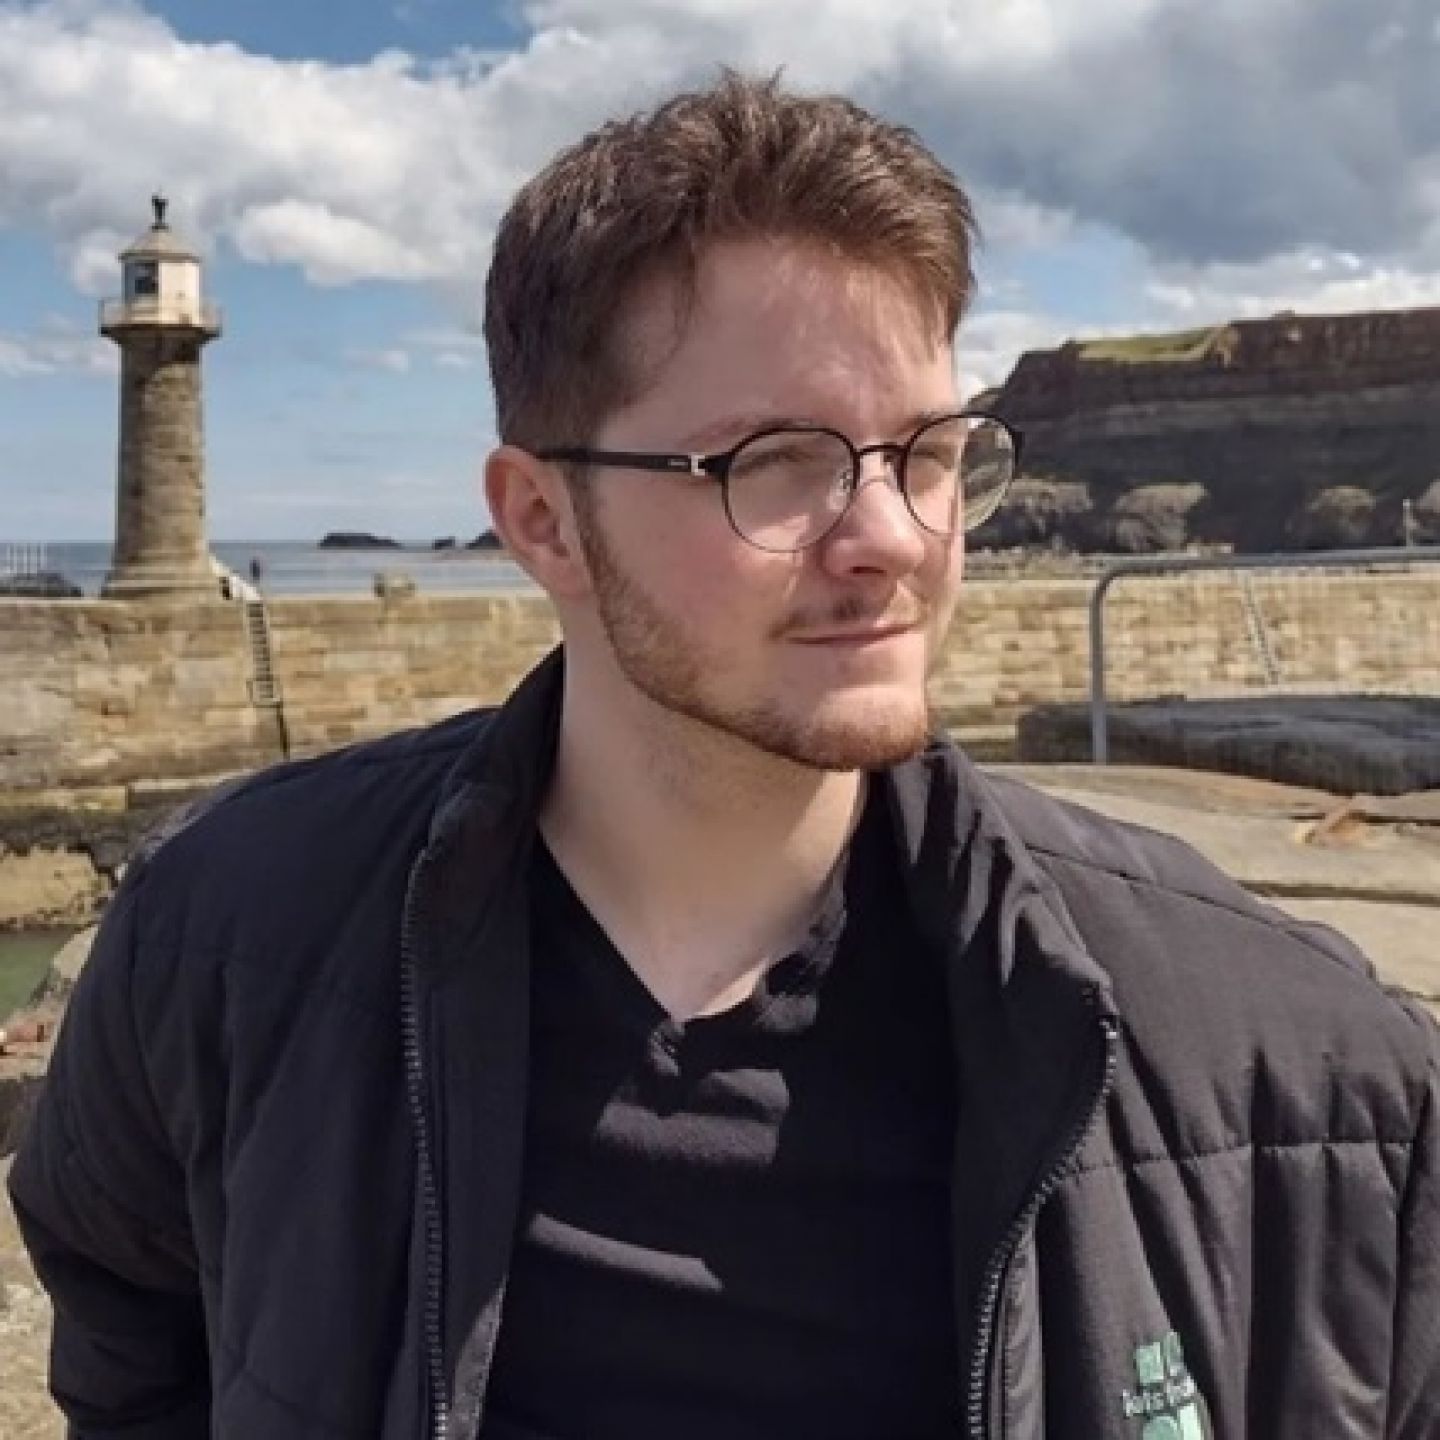 A profile image of GCU student and Common Good Scholarship recipient Darren Barrie, on a beach with a lighthouse in the background.